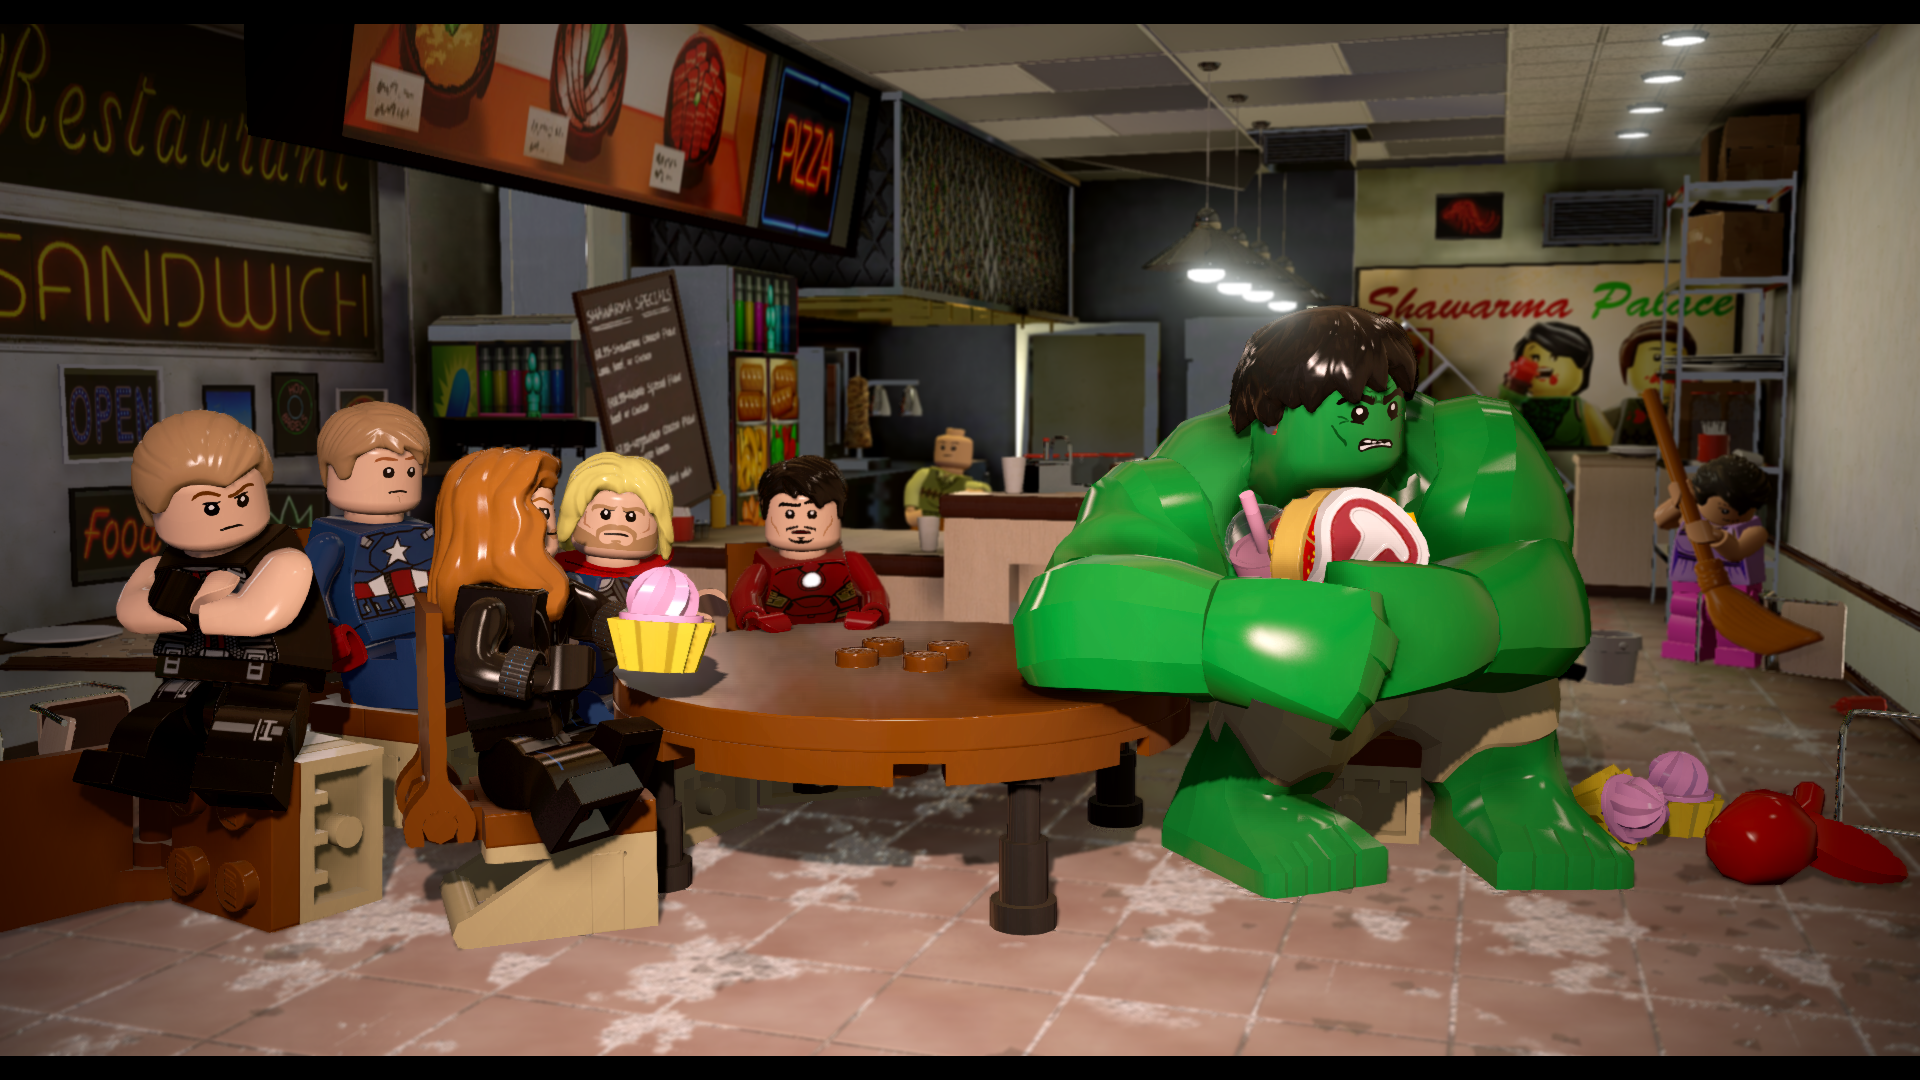 download free lego marvels avengers game